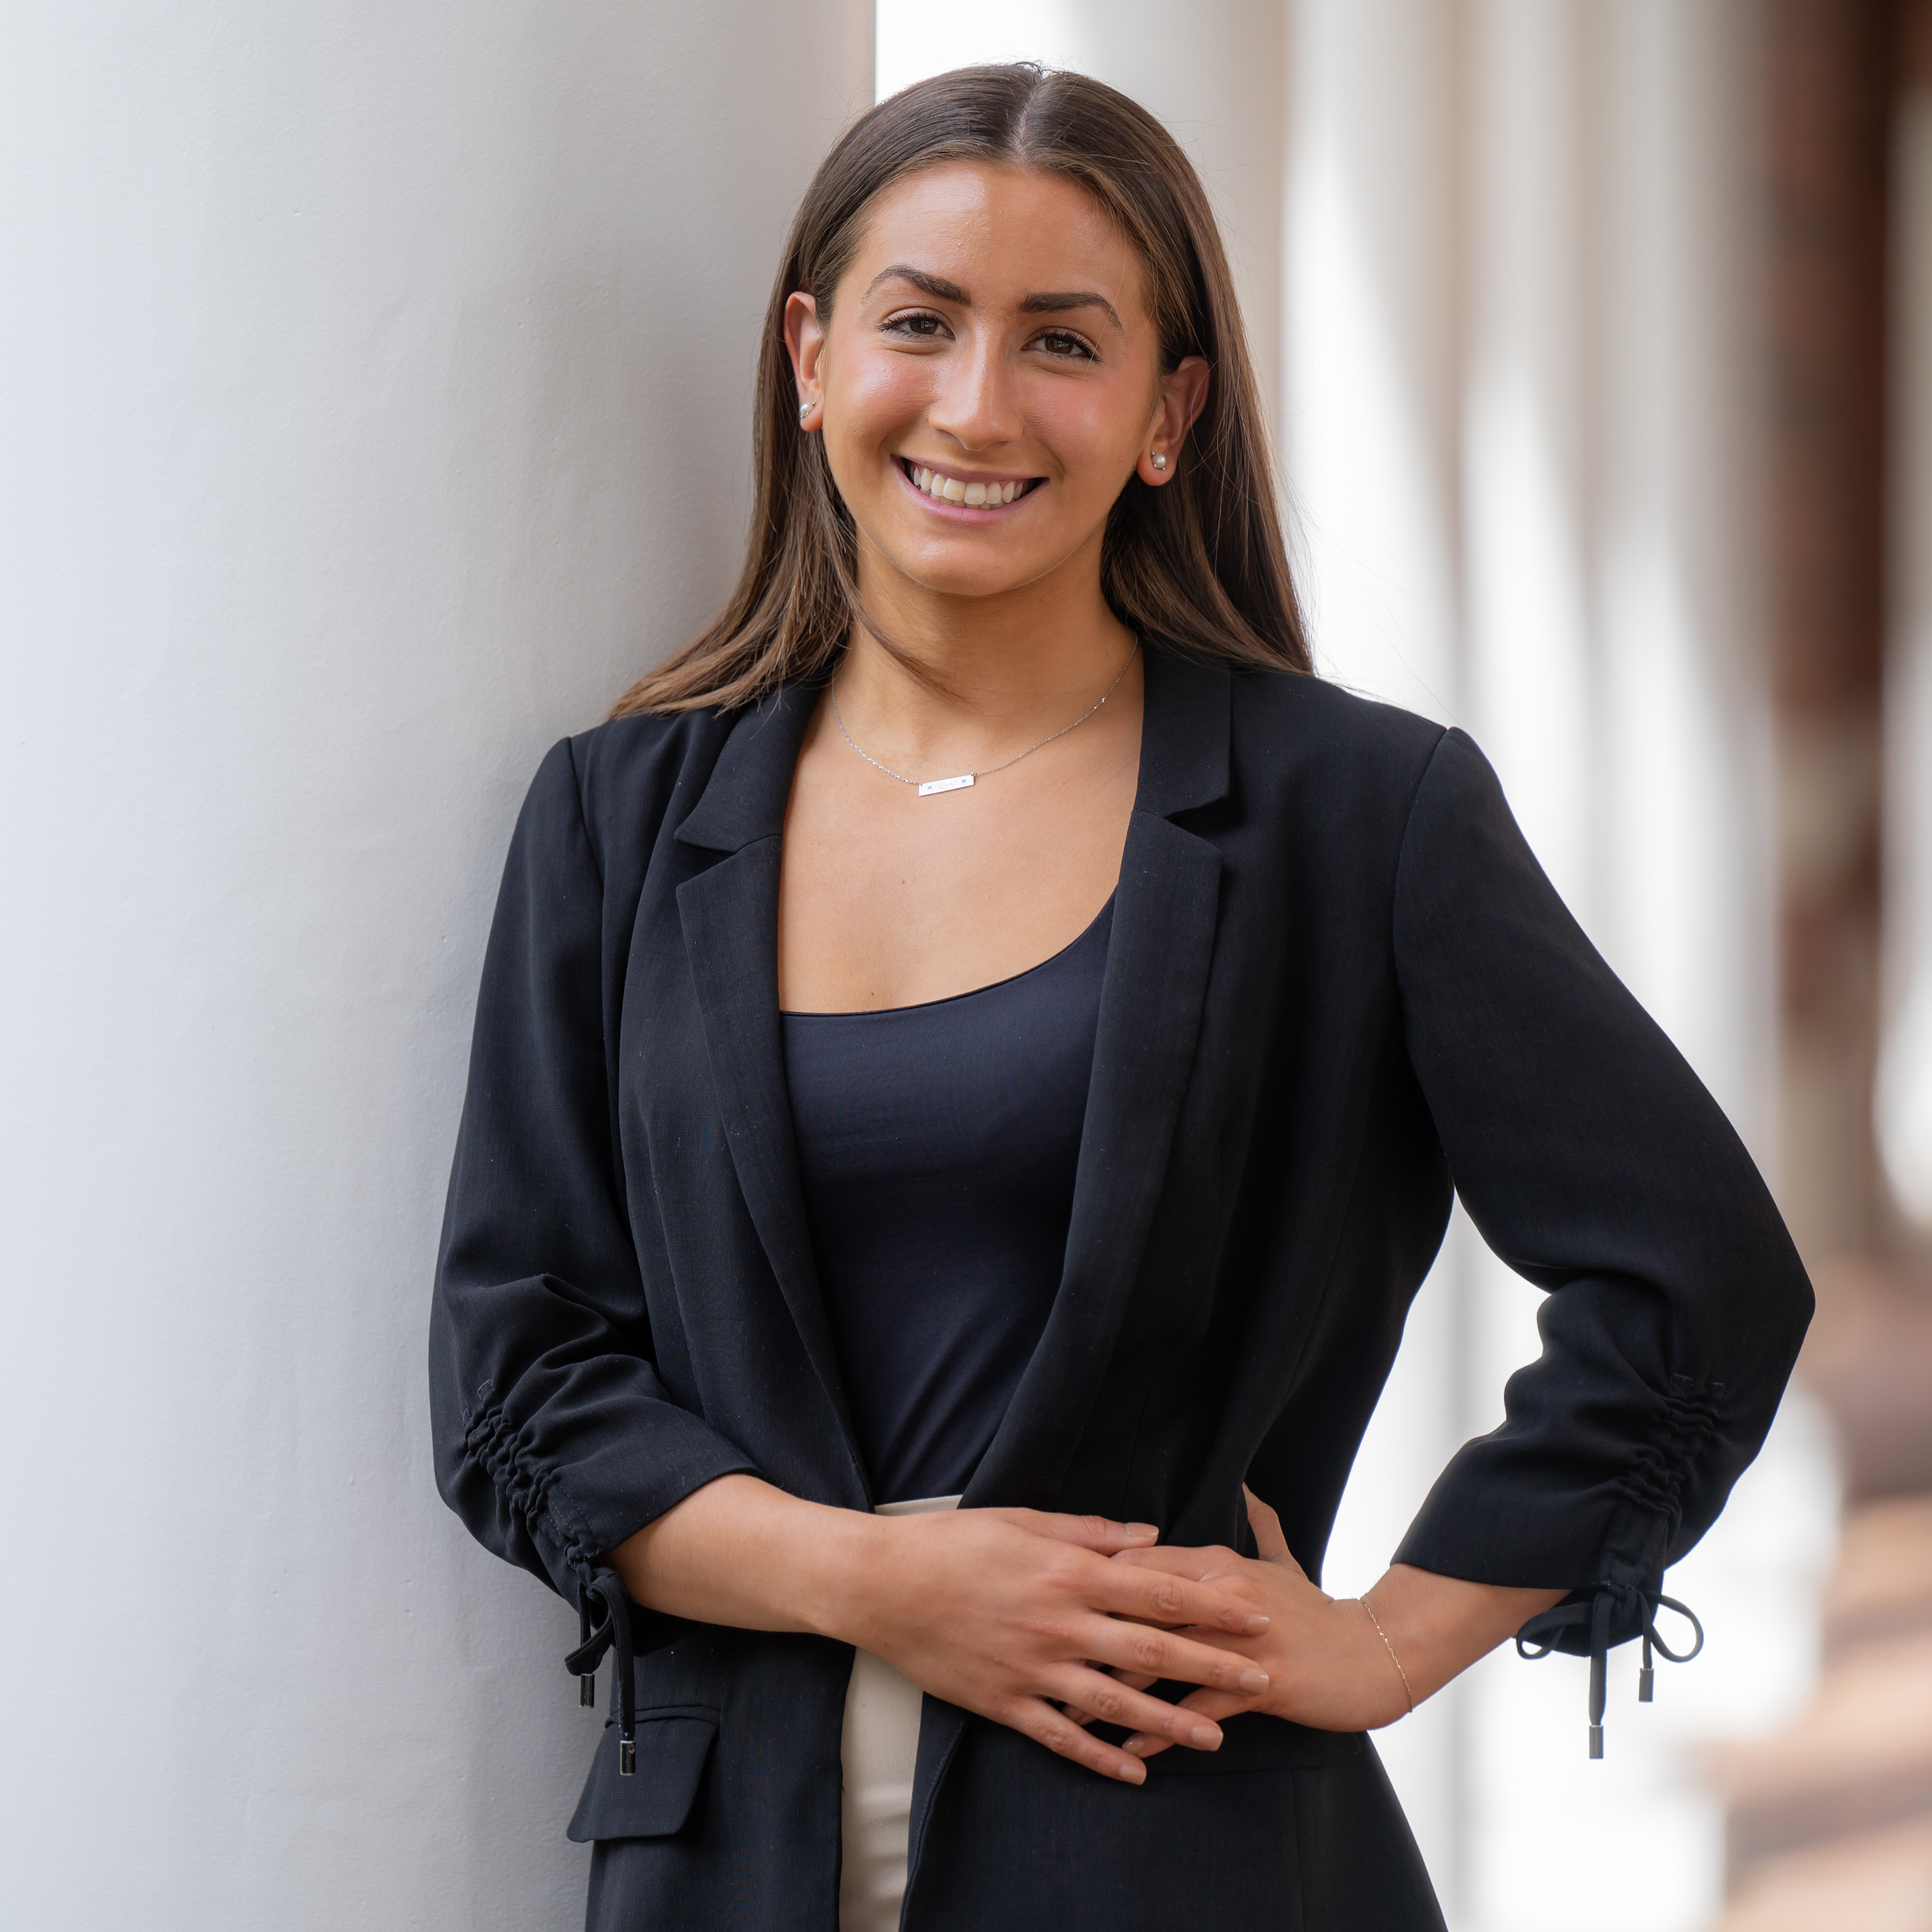 Elon prepared students like Ava Rosen, who is wearing a blue blazer and standing outside, with success after graduation.